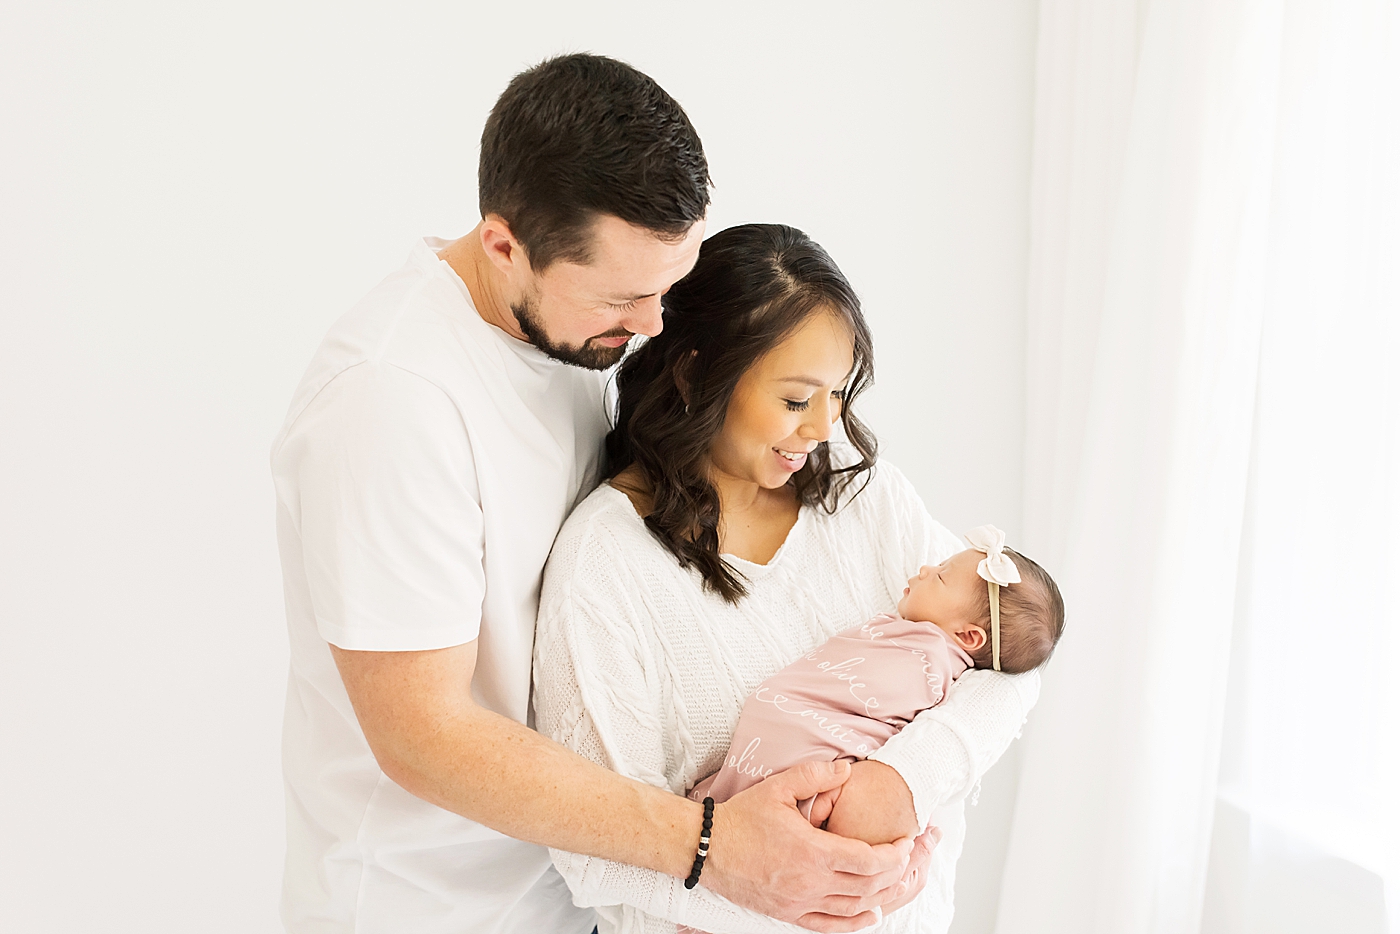 Mom and dad holding their newborn baby girl | Photo by Anna Wisjo Photography